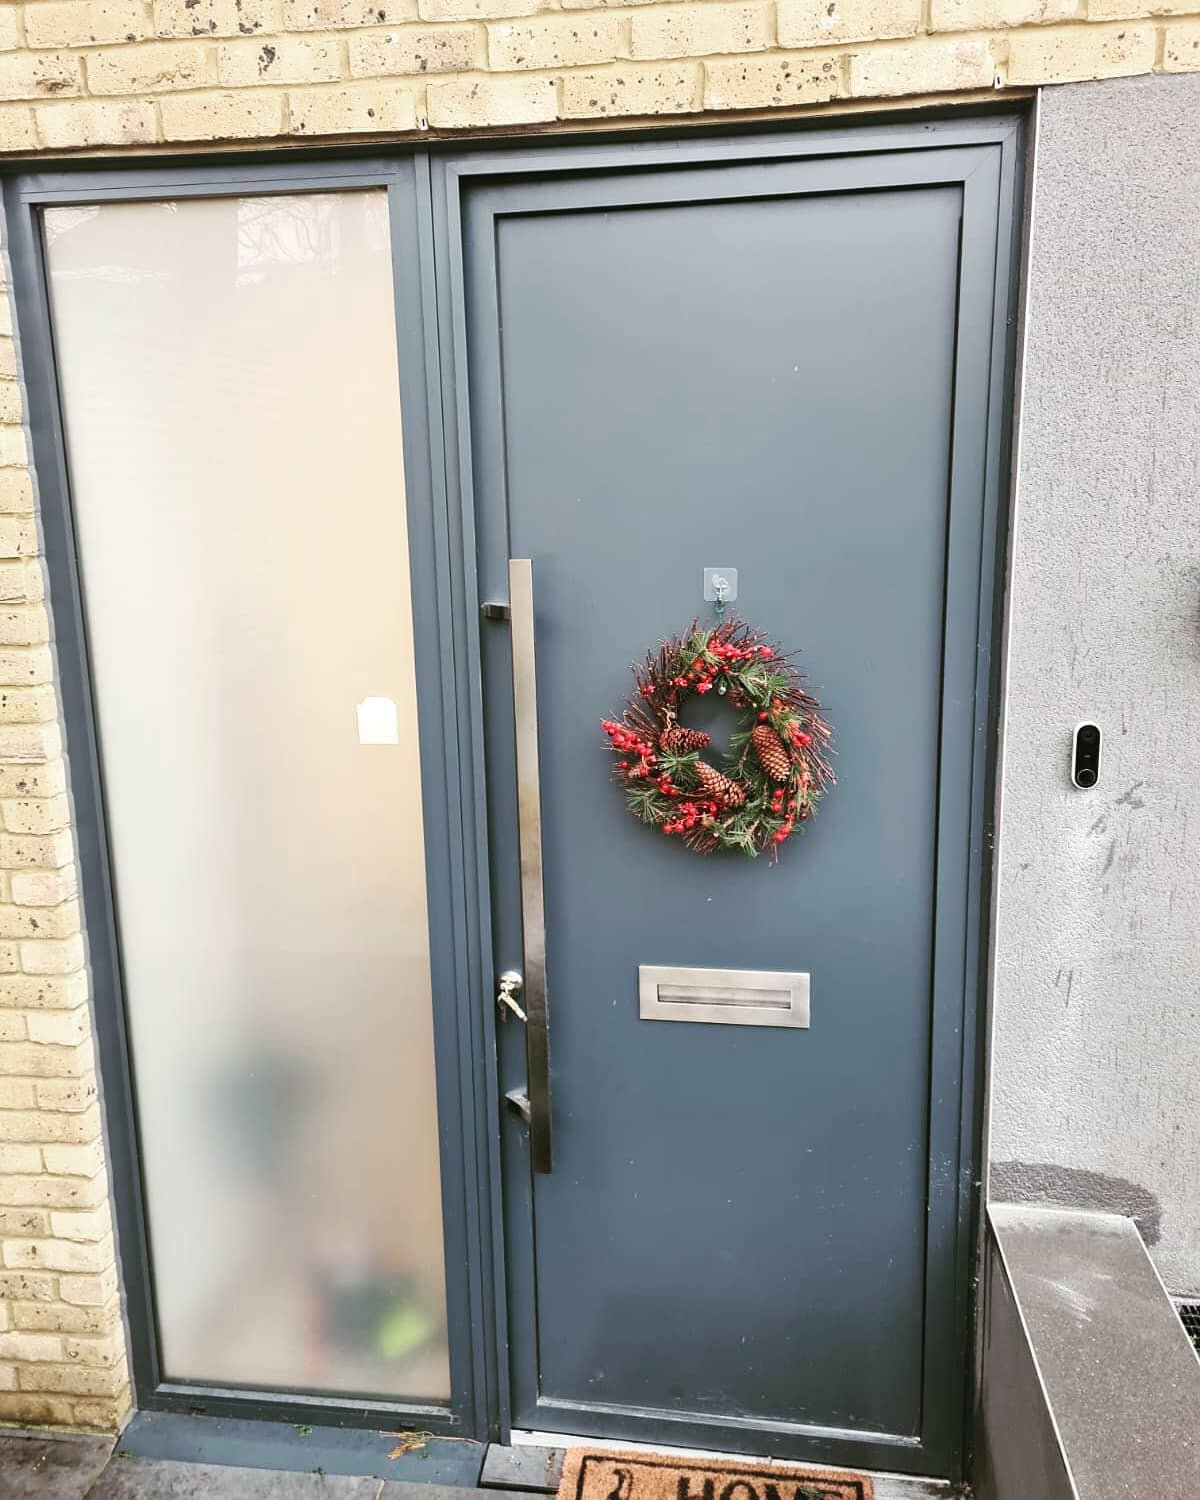 Nest Hello doorbell Installation. Loving that this wreath is still up as well. 
@googlenest 
#nesthello #googlenestinstallations #videodoorbell #electrician #electricalcontractors #niceicapprovedcontractor #homeimprovements #homesecurity #sparkylife 